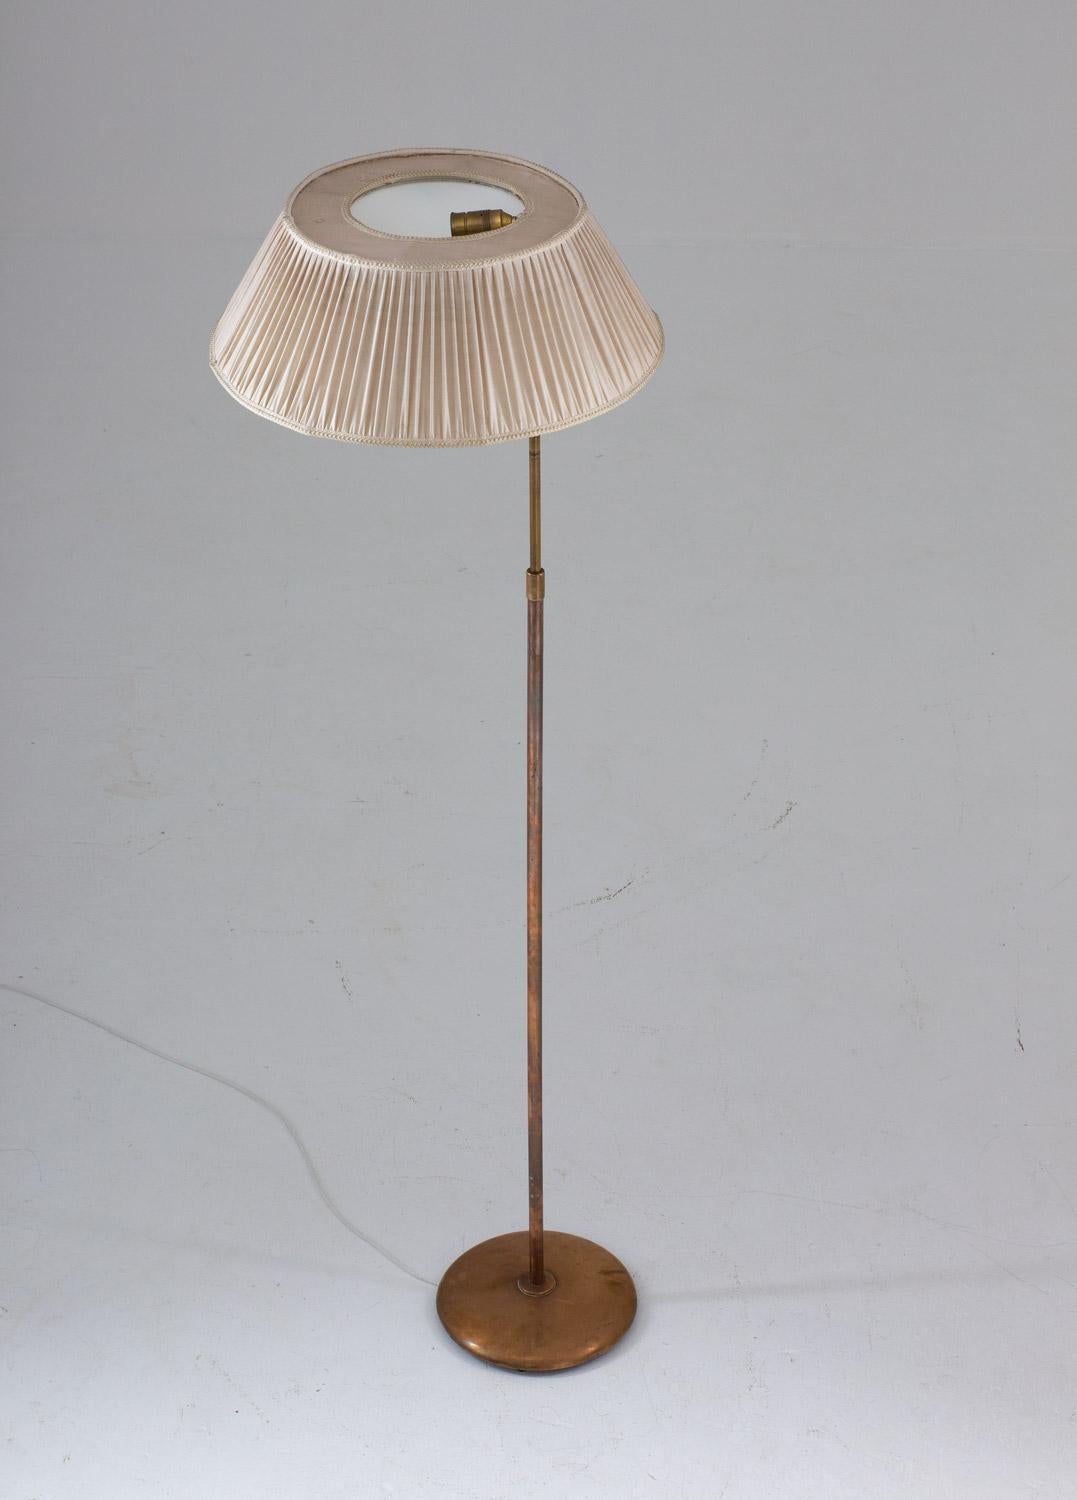 Scandinavian midcentury floor lamp in brass, attributed to Nordiska Kompaniet (NK), 1930s.
This rare floor lamp is made of solid brass, with original fabric shade supported by a white uplight metal shade. It offers two light sources, one uplight